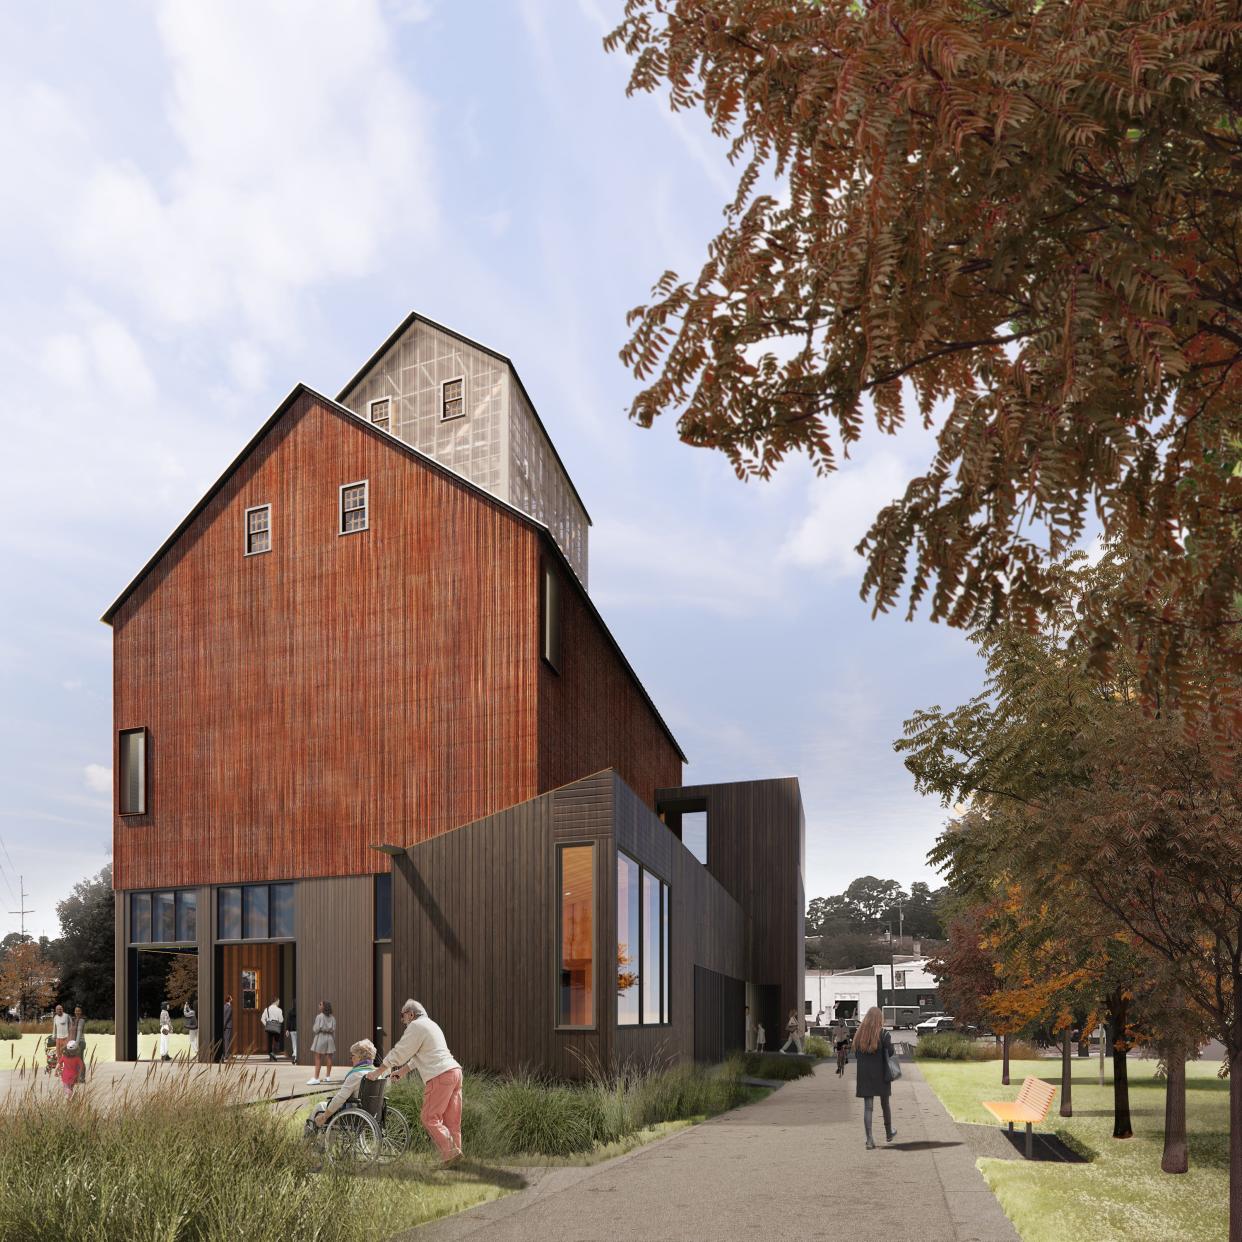 The Door County Granary will include an addition with a catering kitchen and public restrooms. Siding from the Globe Granary, Wisconsin's oldest grain elevator, will be repurposed as part of this restoration effort.